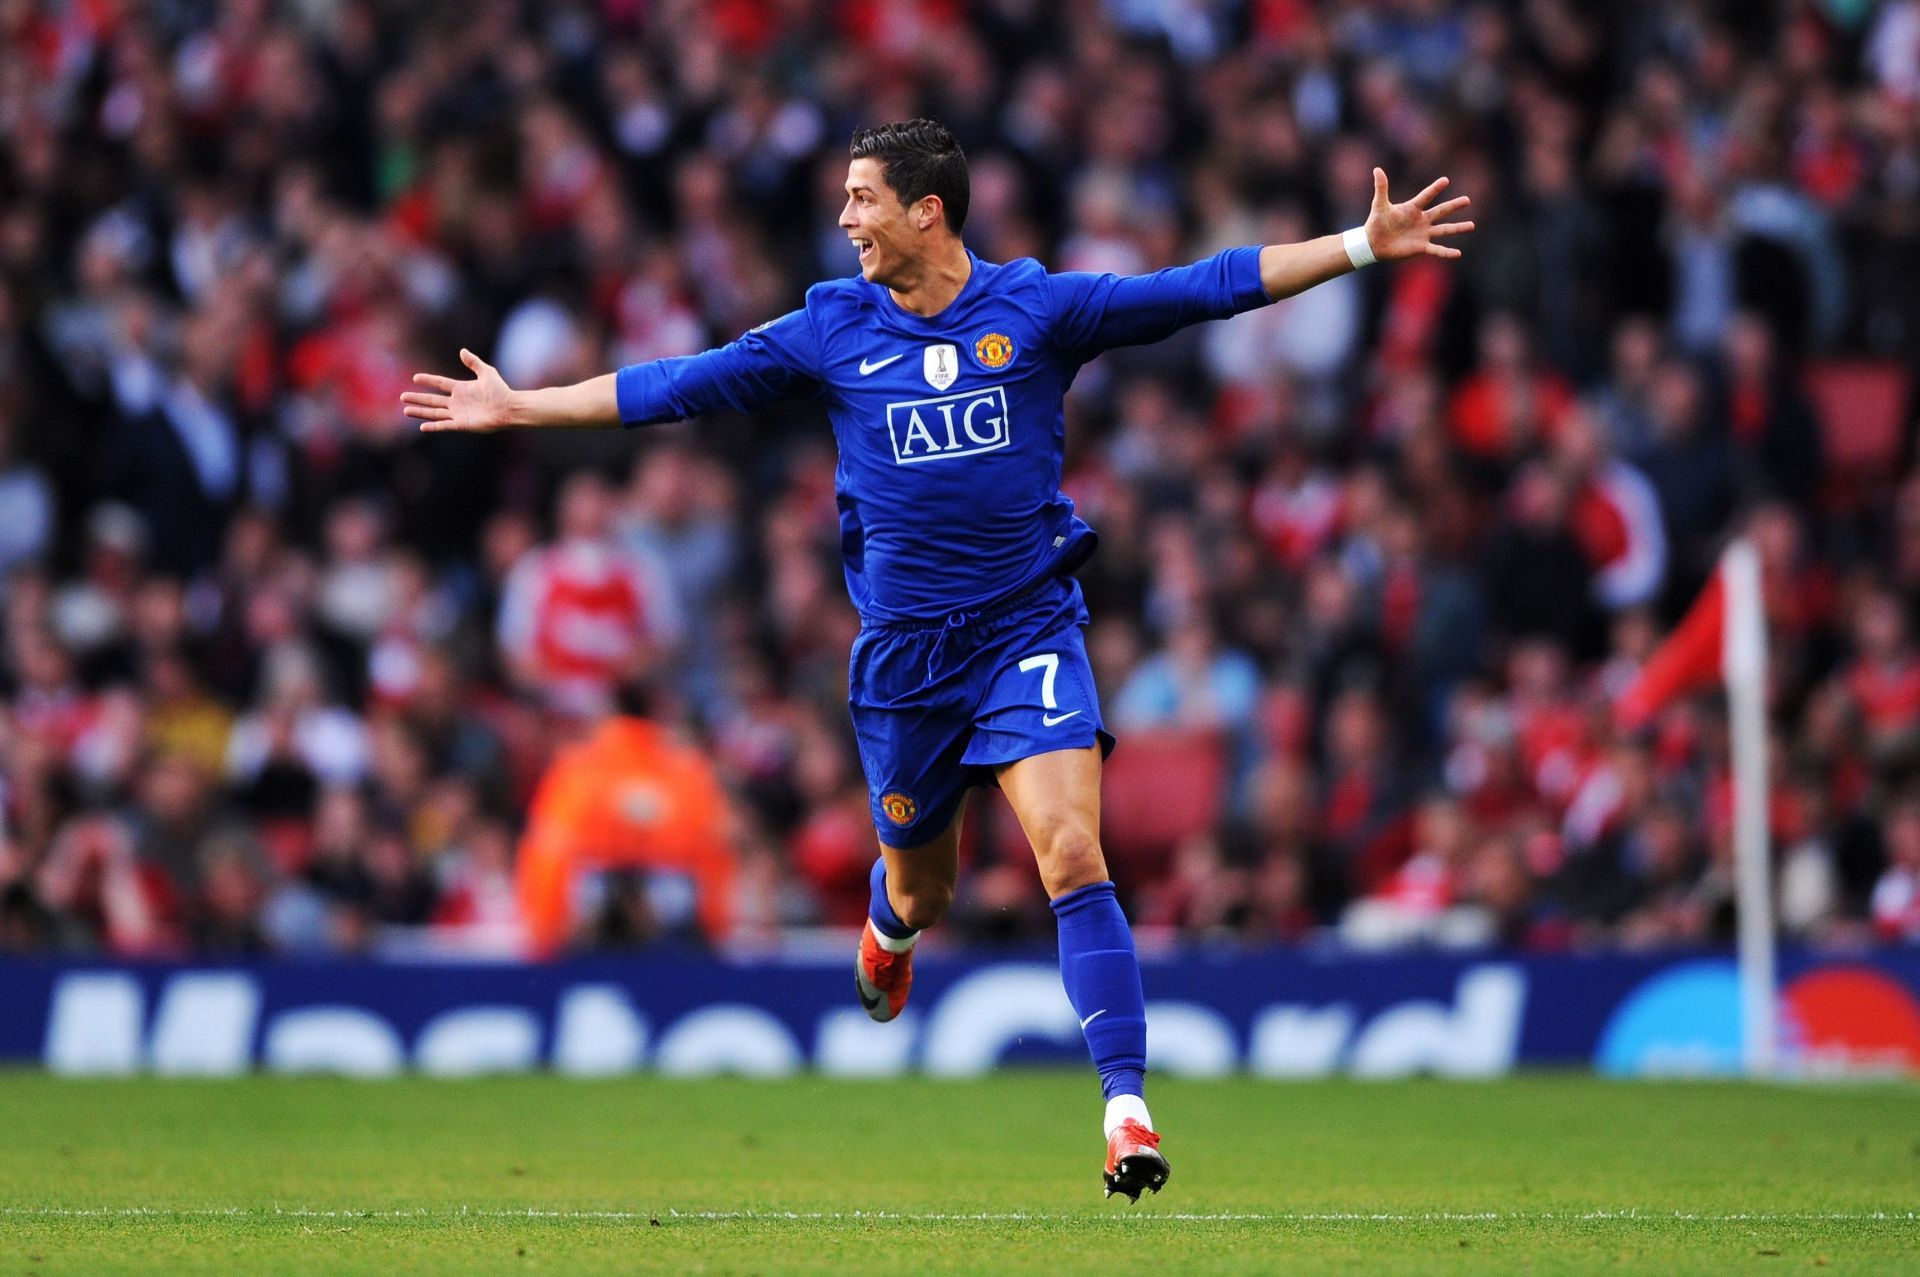 Cristiano Ronaldo has been a prolific goal scorer in England, Spain and Italy